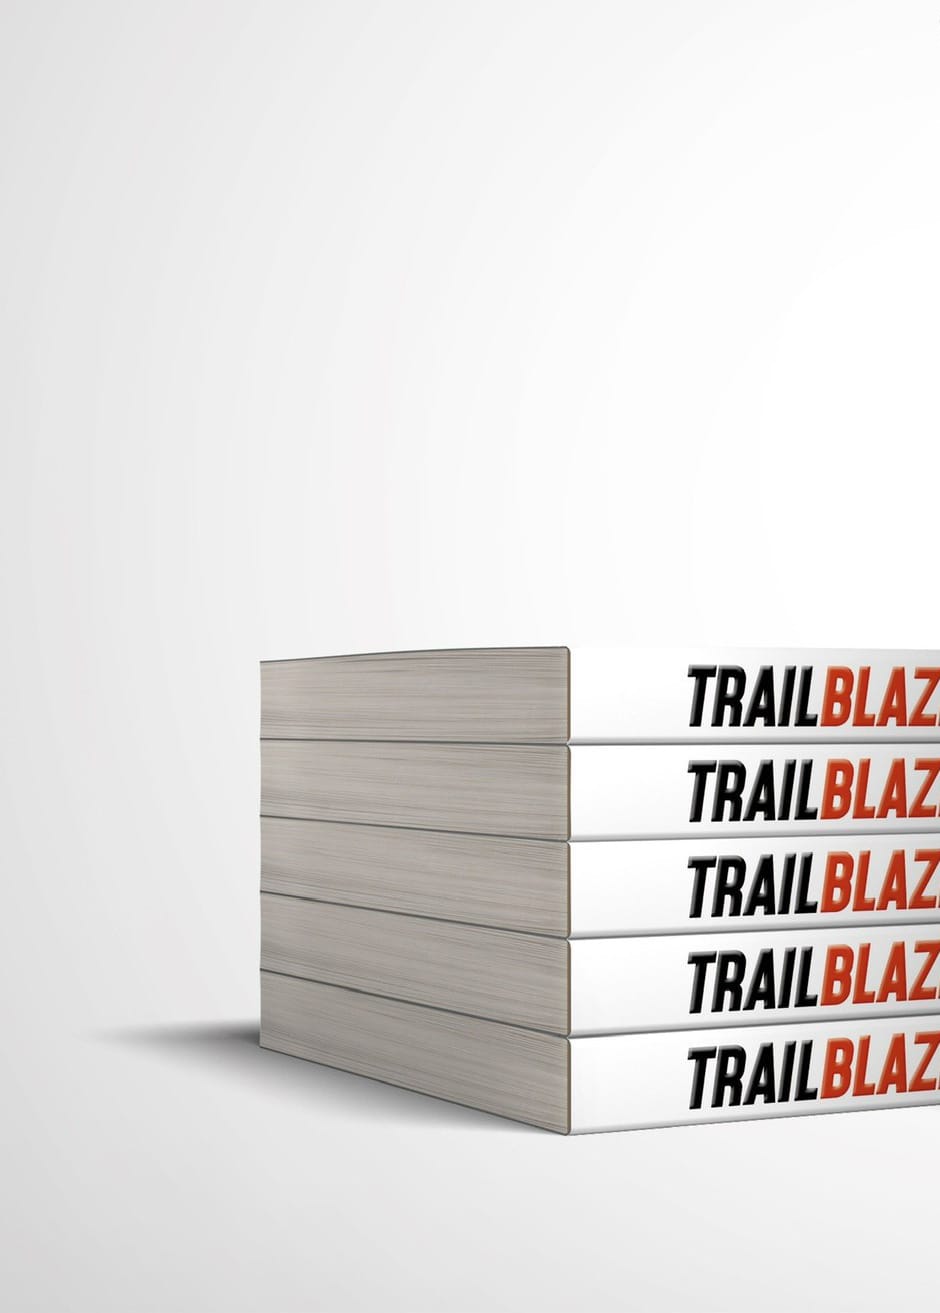 Trail Blazing the Chinese version book